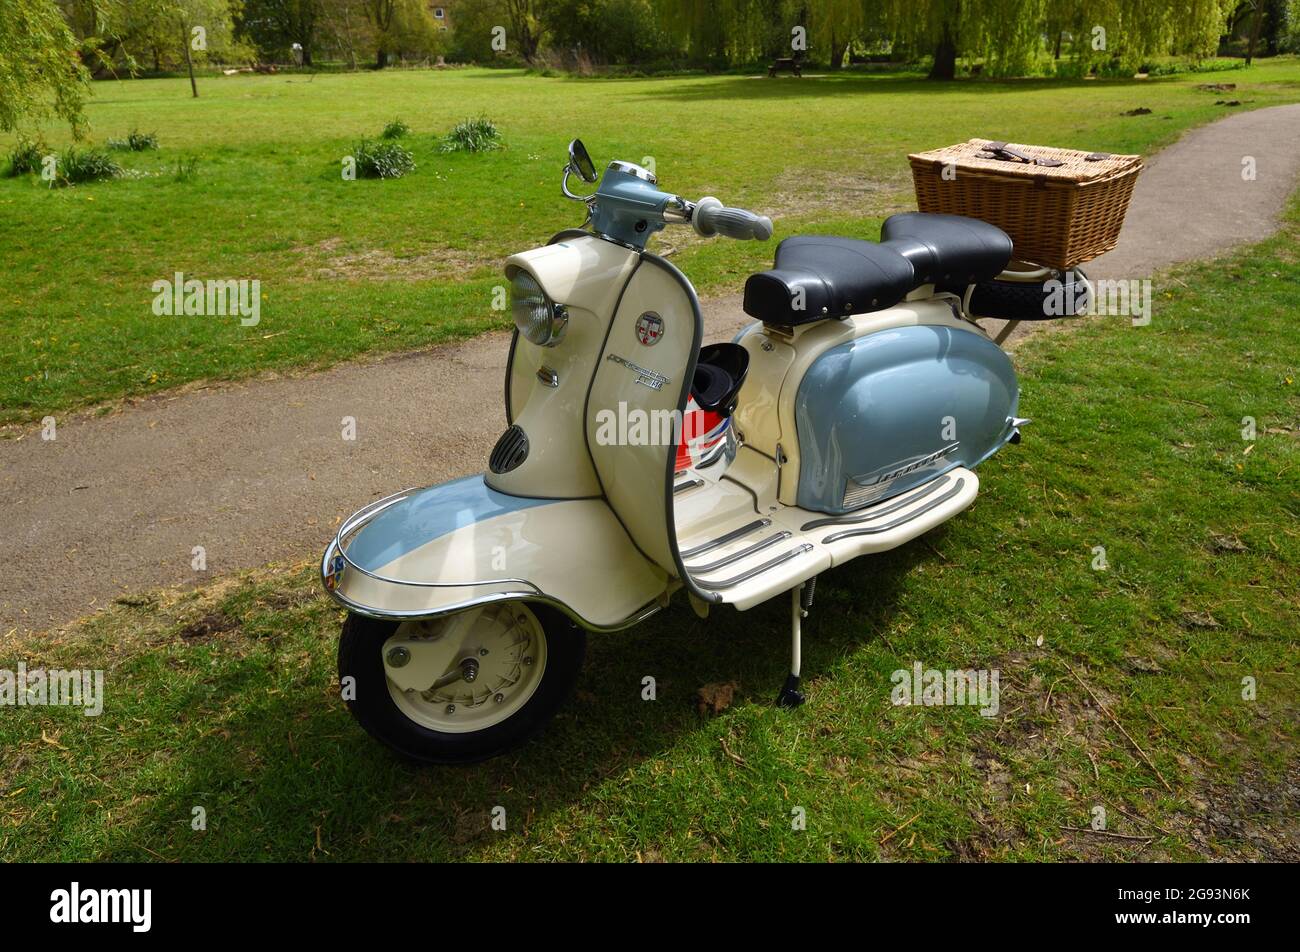 Blue and White Lambretta Motor Scooter with basket on the back Stock Photo  - Alamy